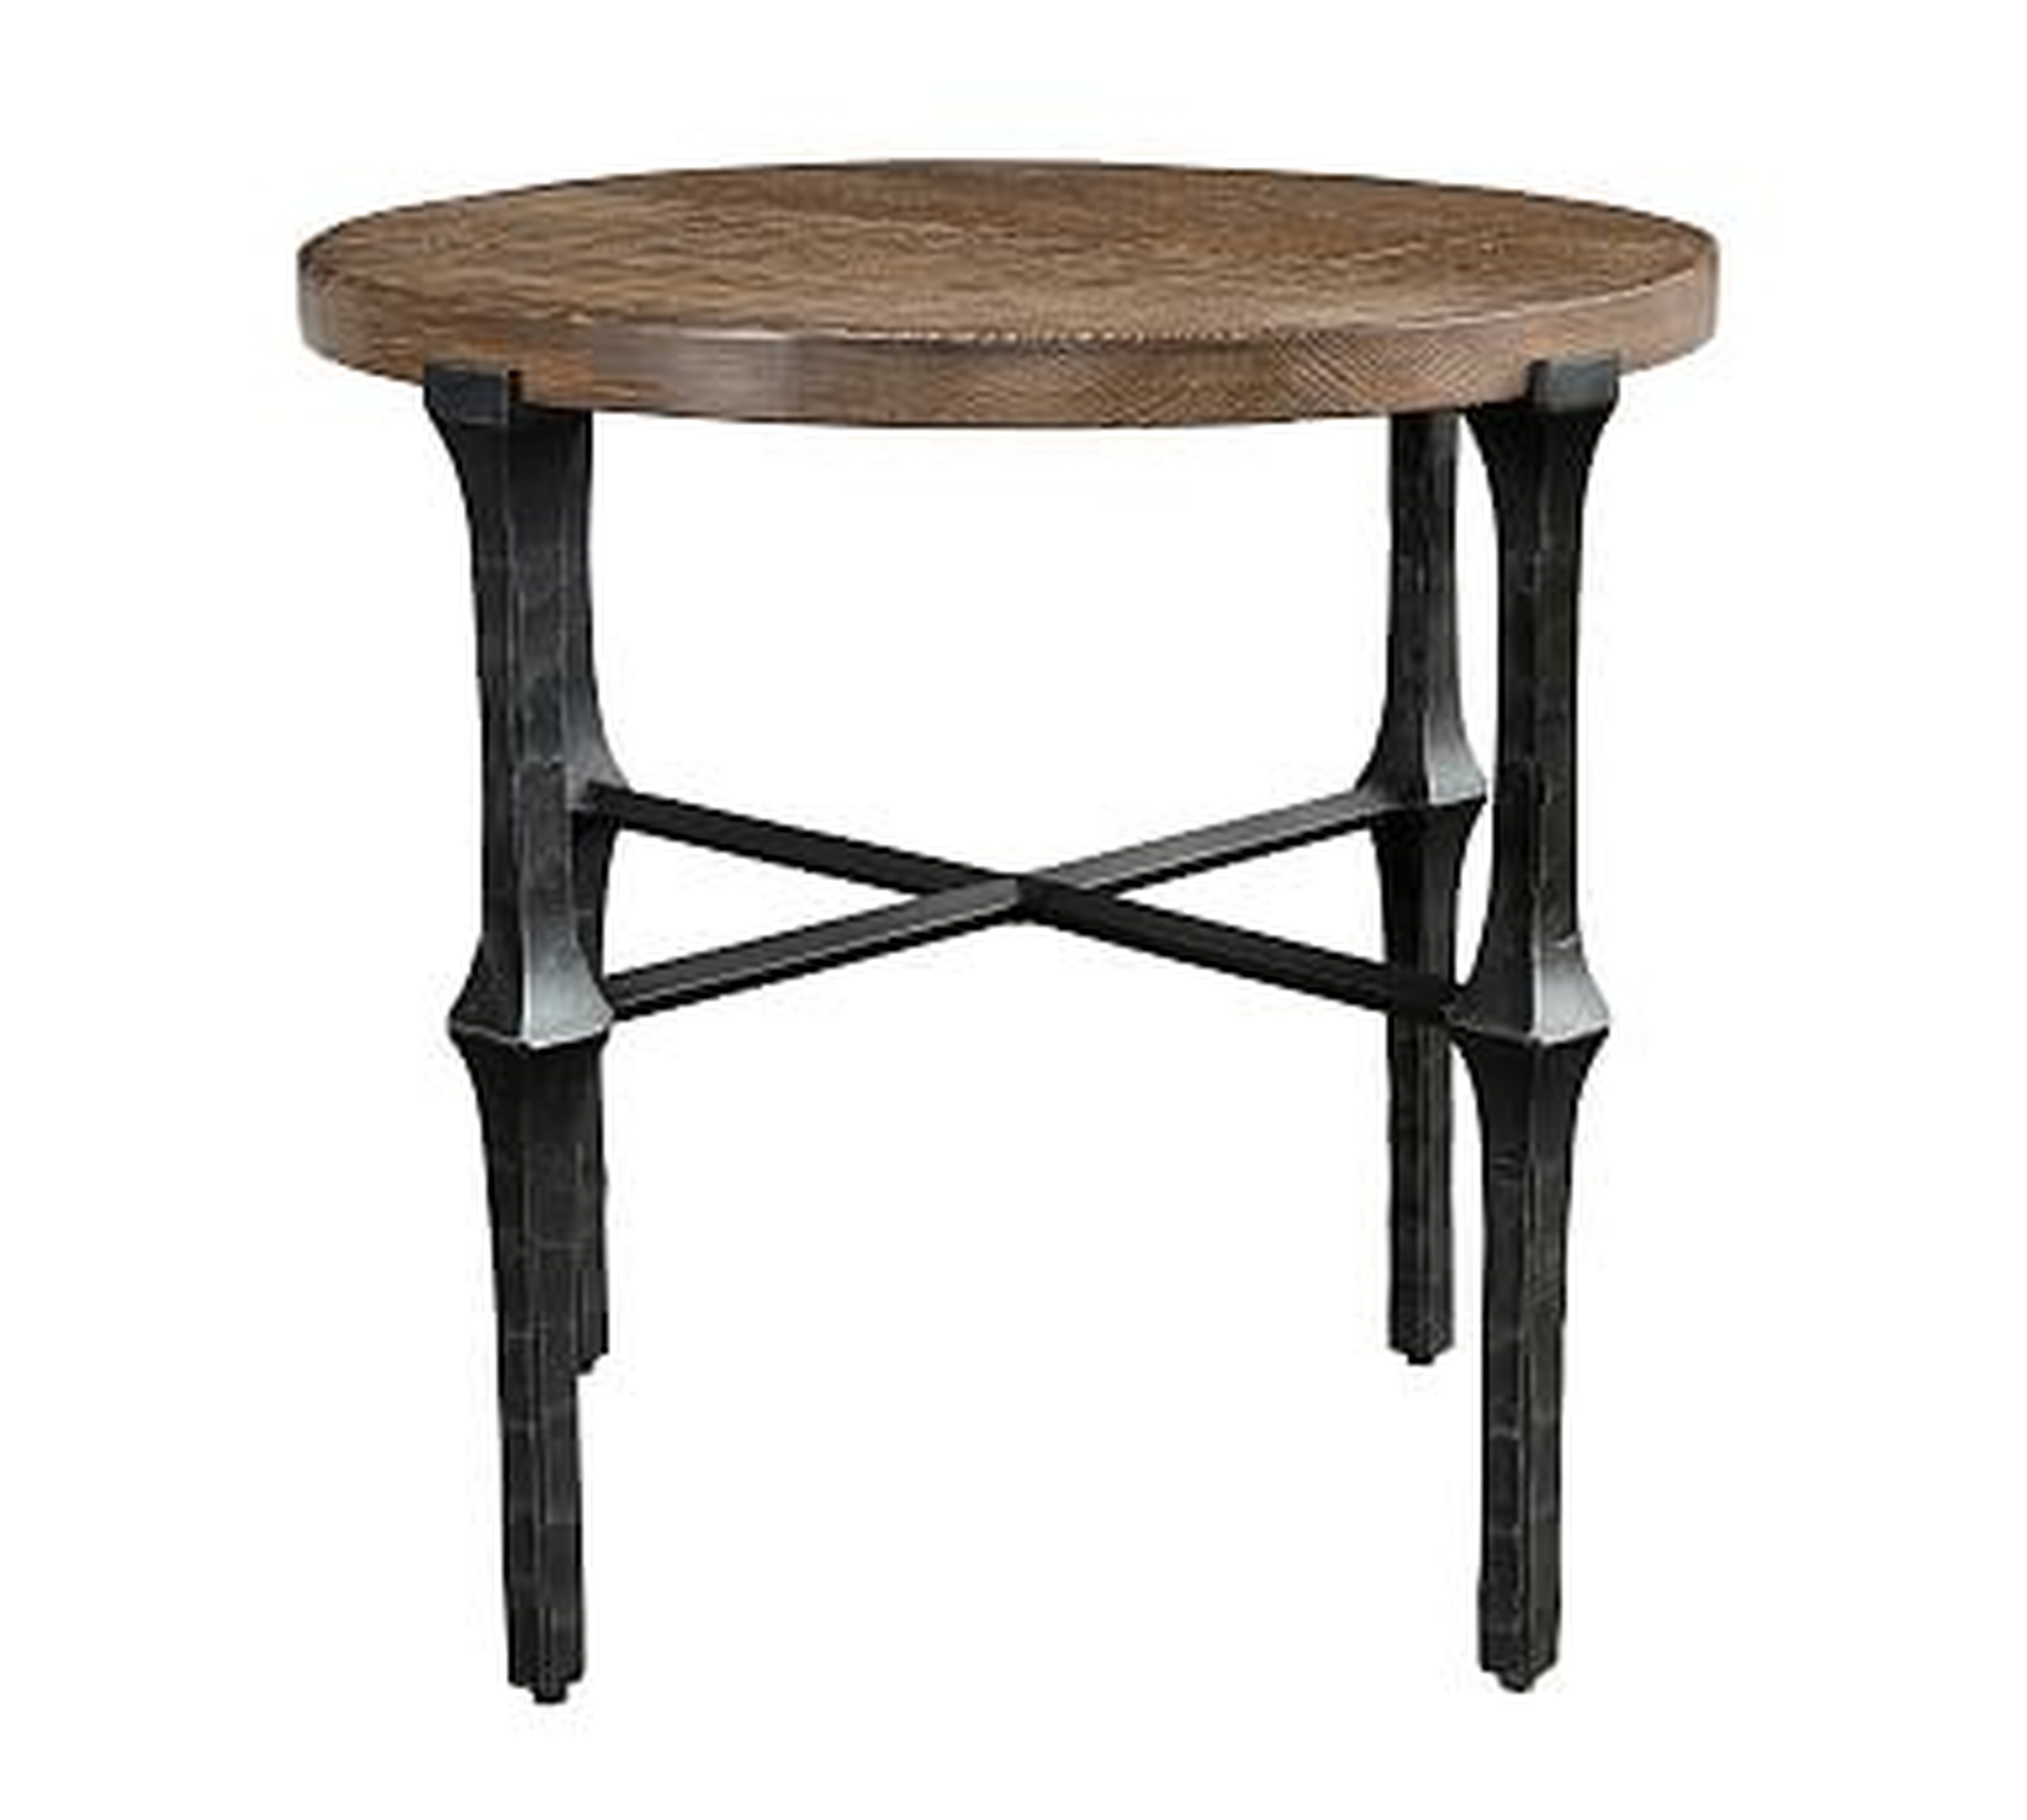 Kitts End Table - Pottery Barn